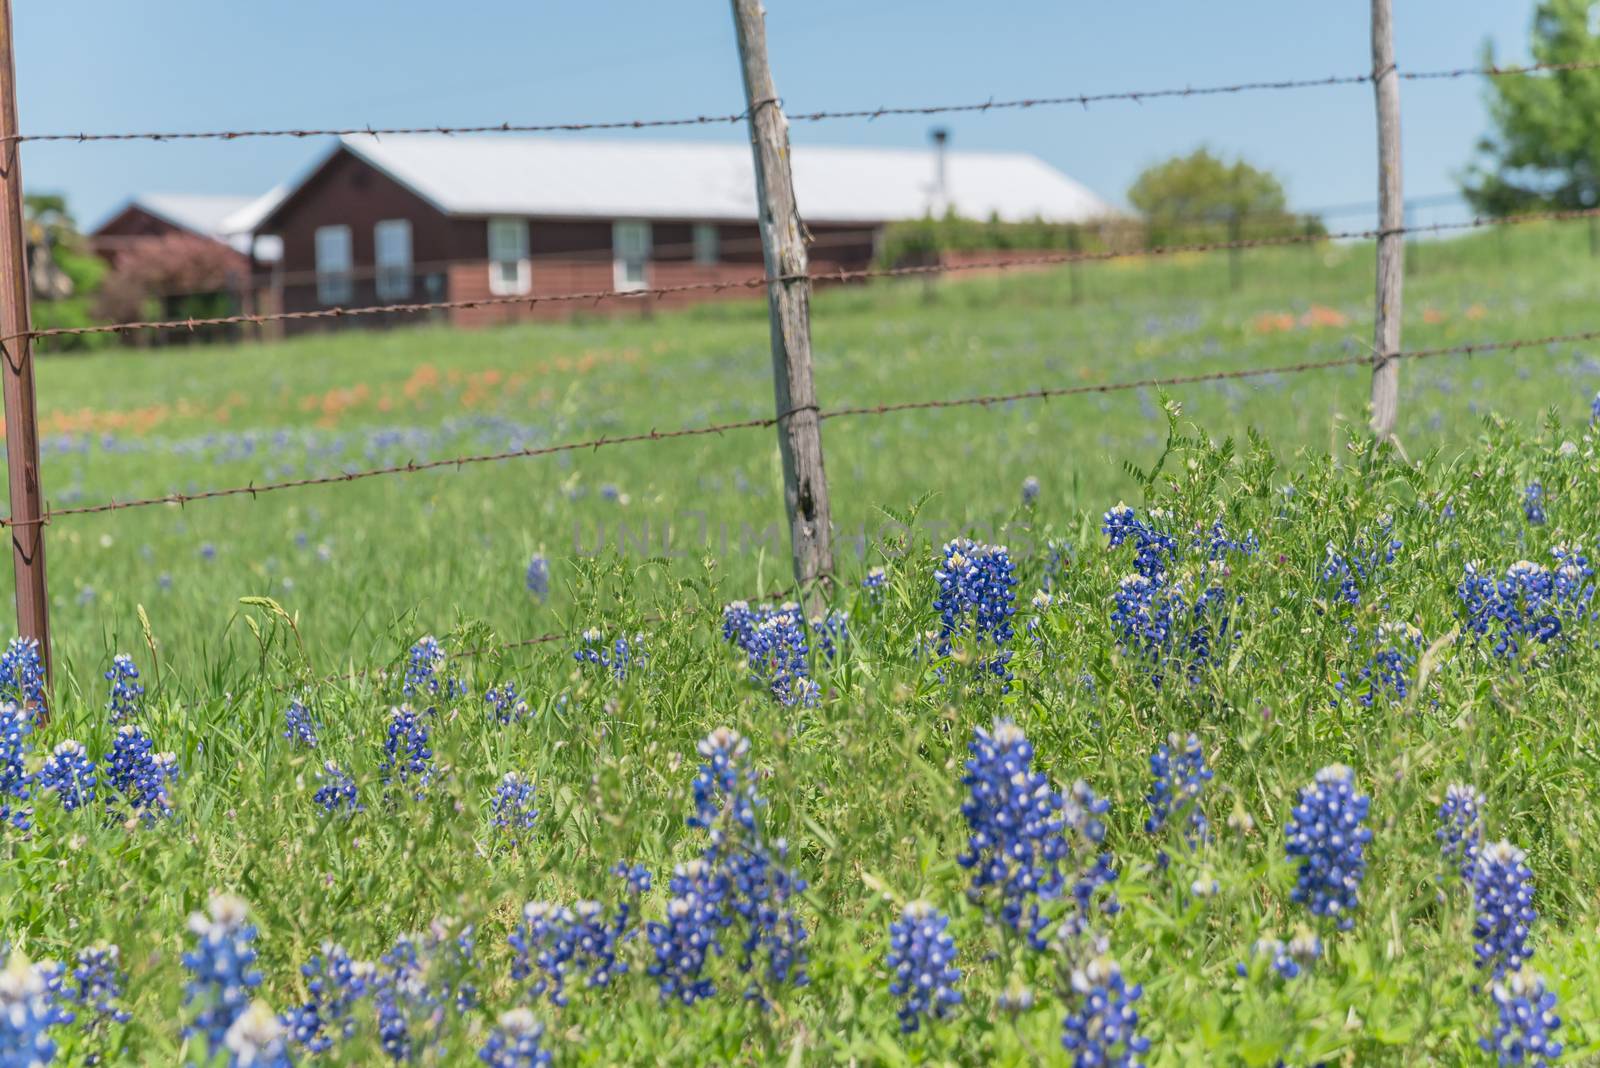 Bluebonnet and Indian Paintbrush wildflower blooming in springtime at rural farm in Bristol, Texas, USA. Scenic life on the ranch with rustic fence